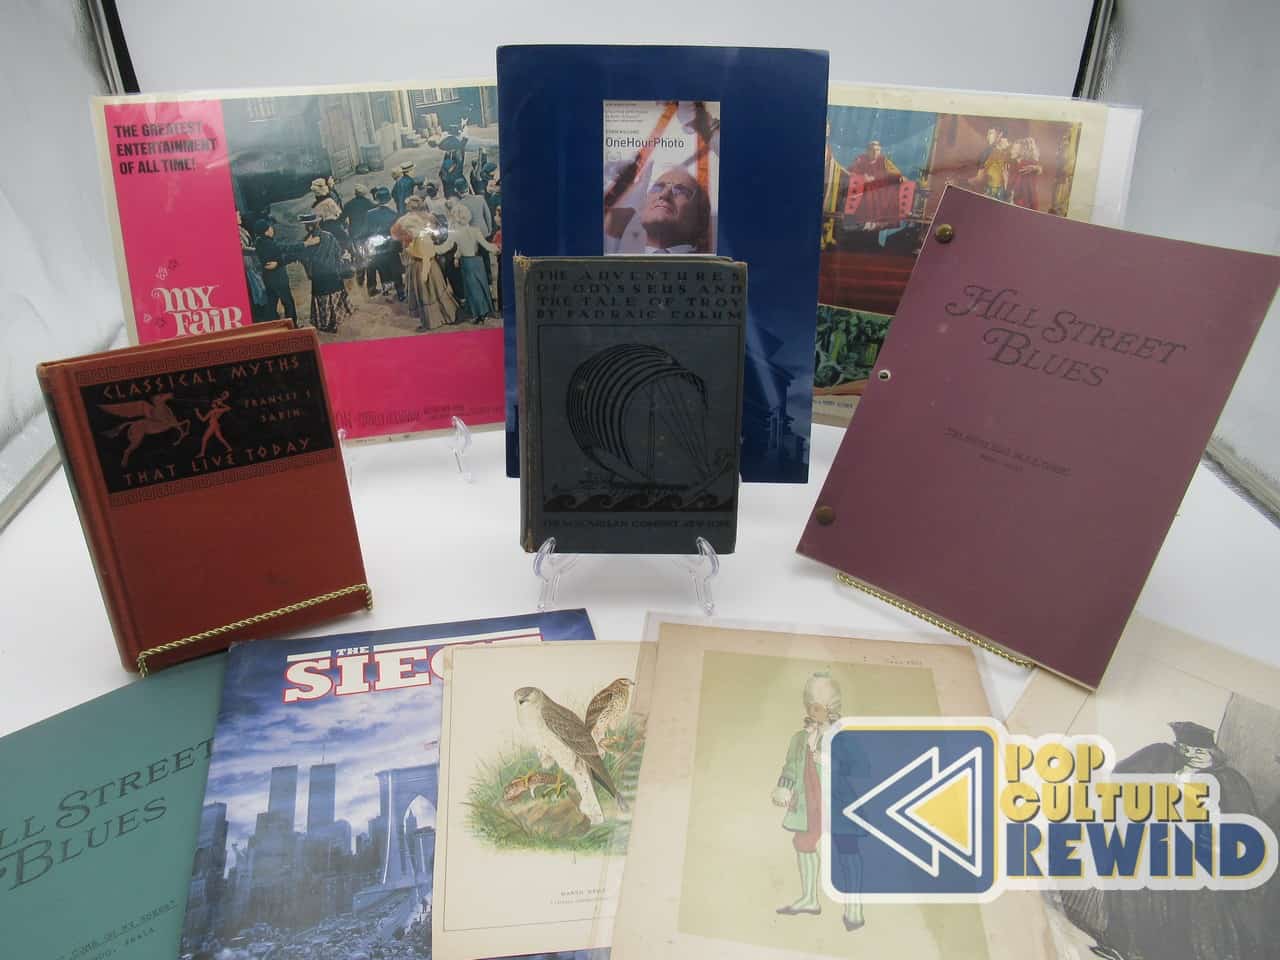 Books, Lobby Cards, and more coming to auction 4/29!